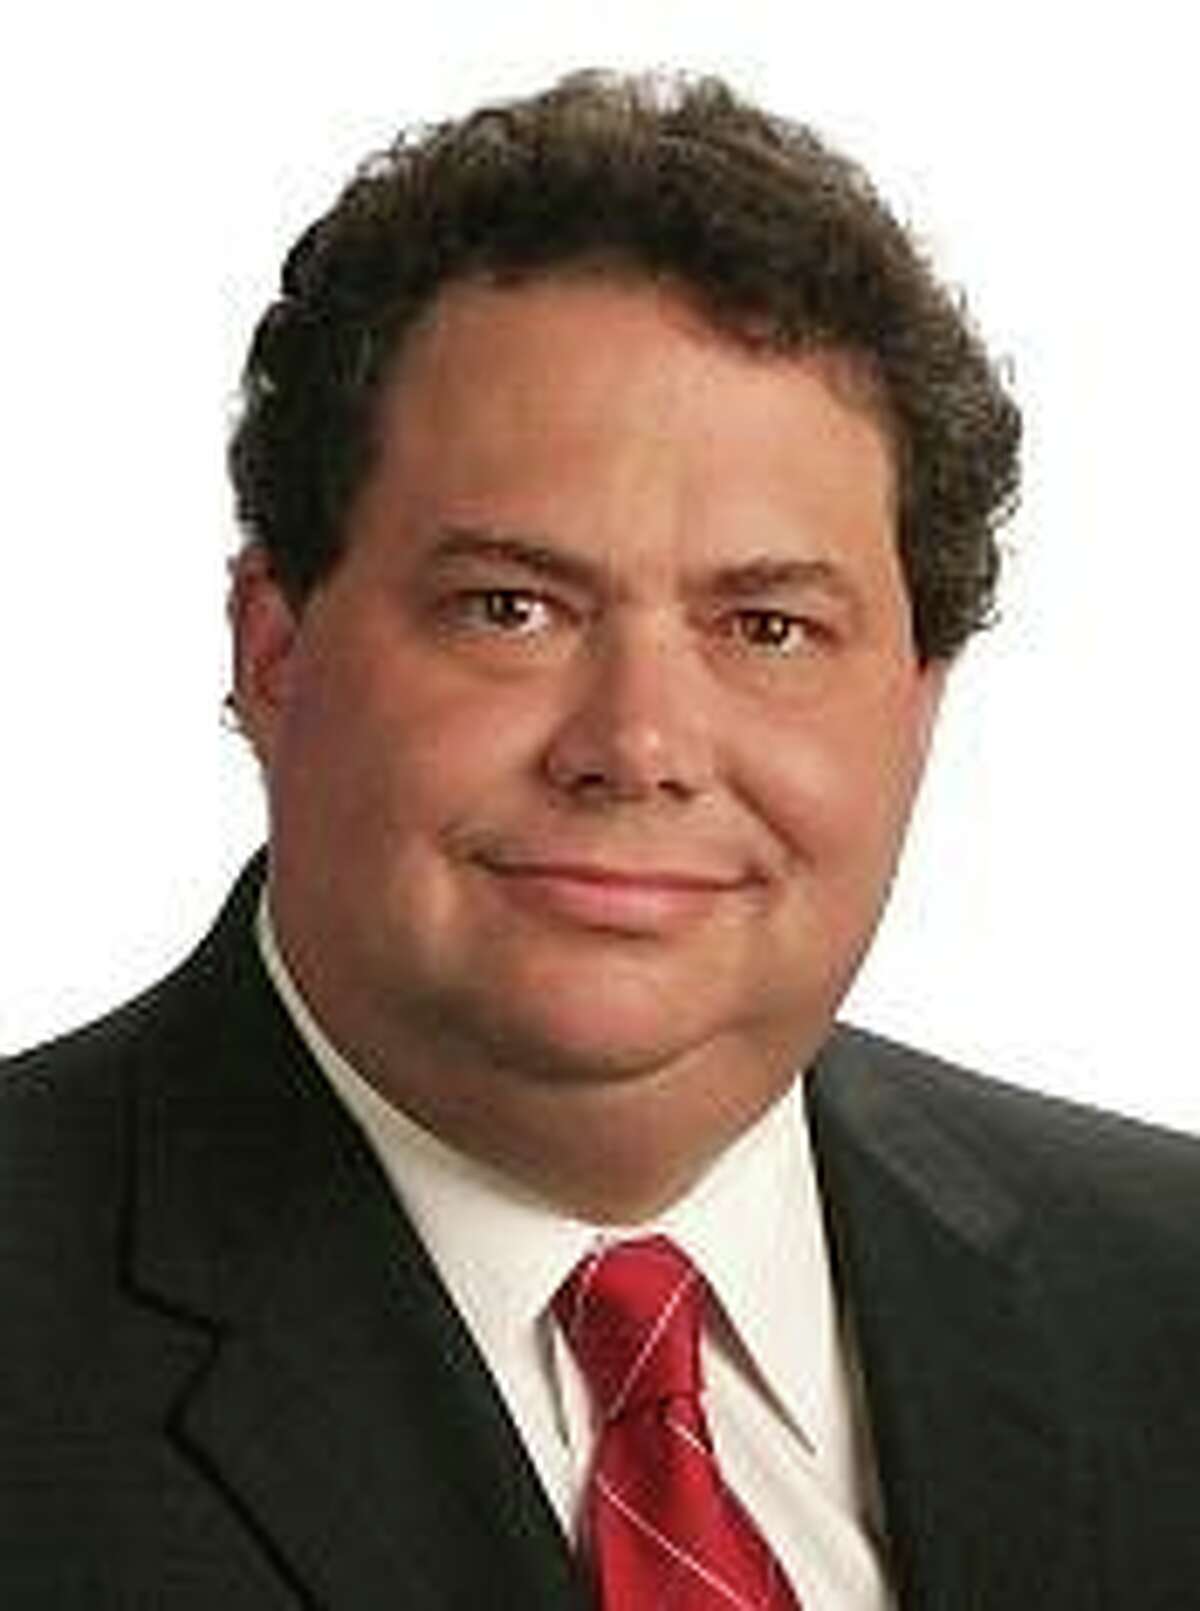 Rep. Blake Farenthold said he is open to everything “on the table” on immigration reform, but remains doubtful on citizenship.